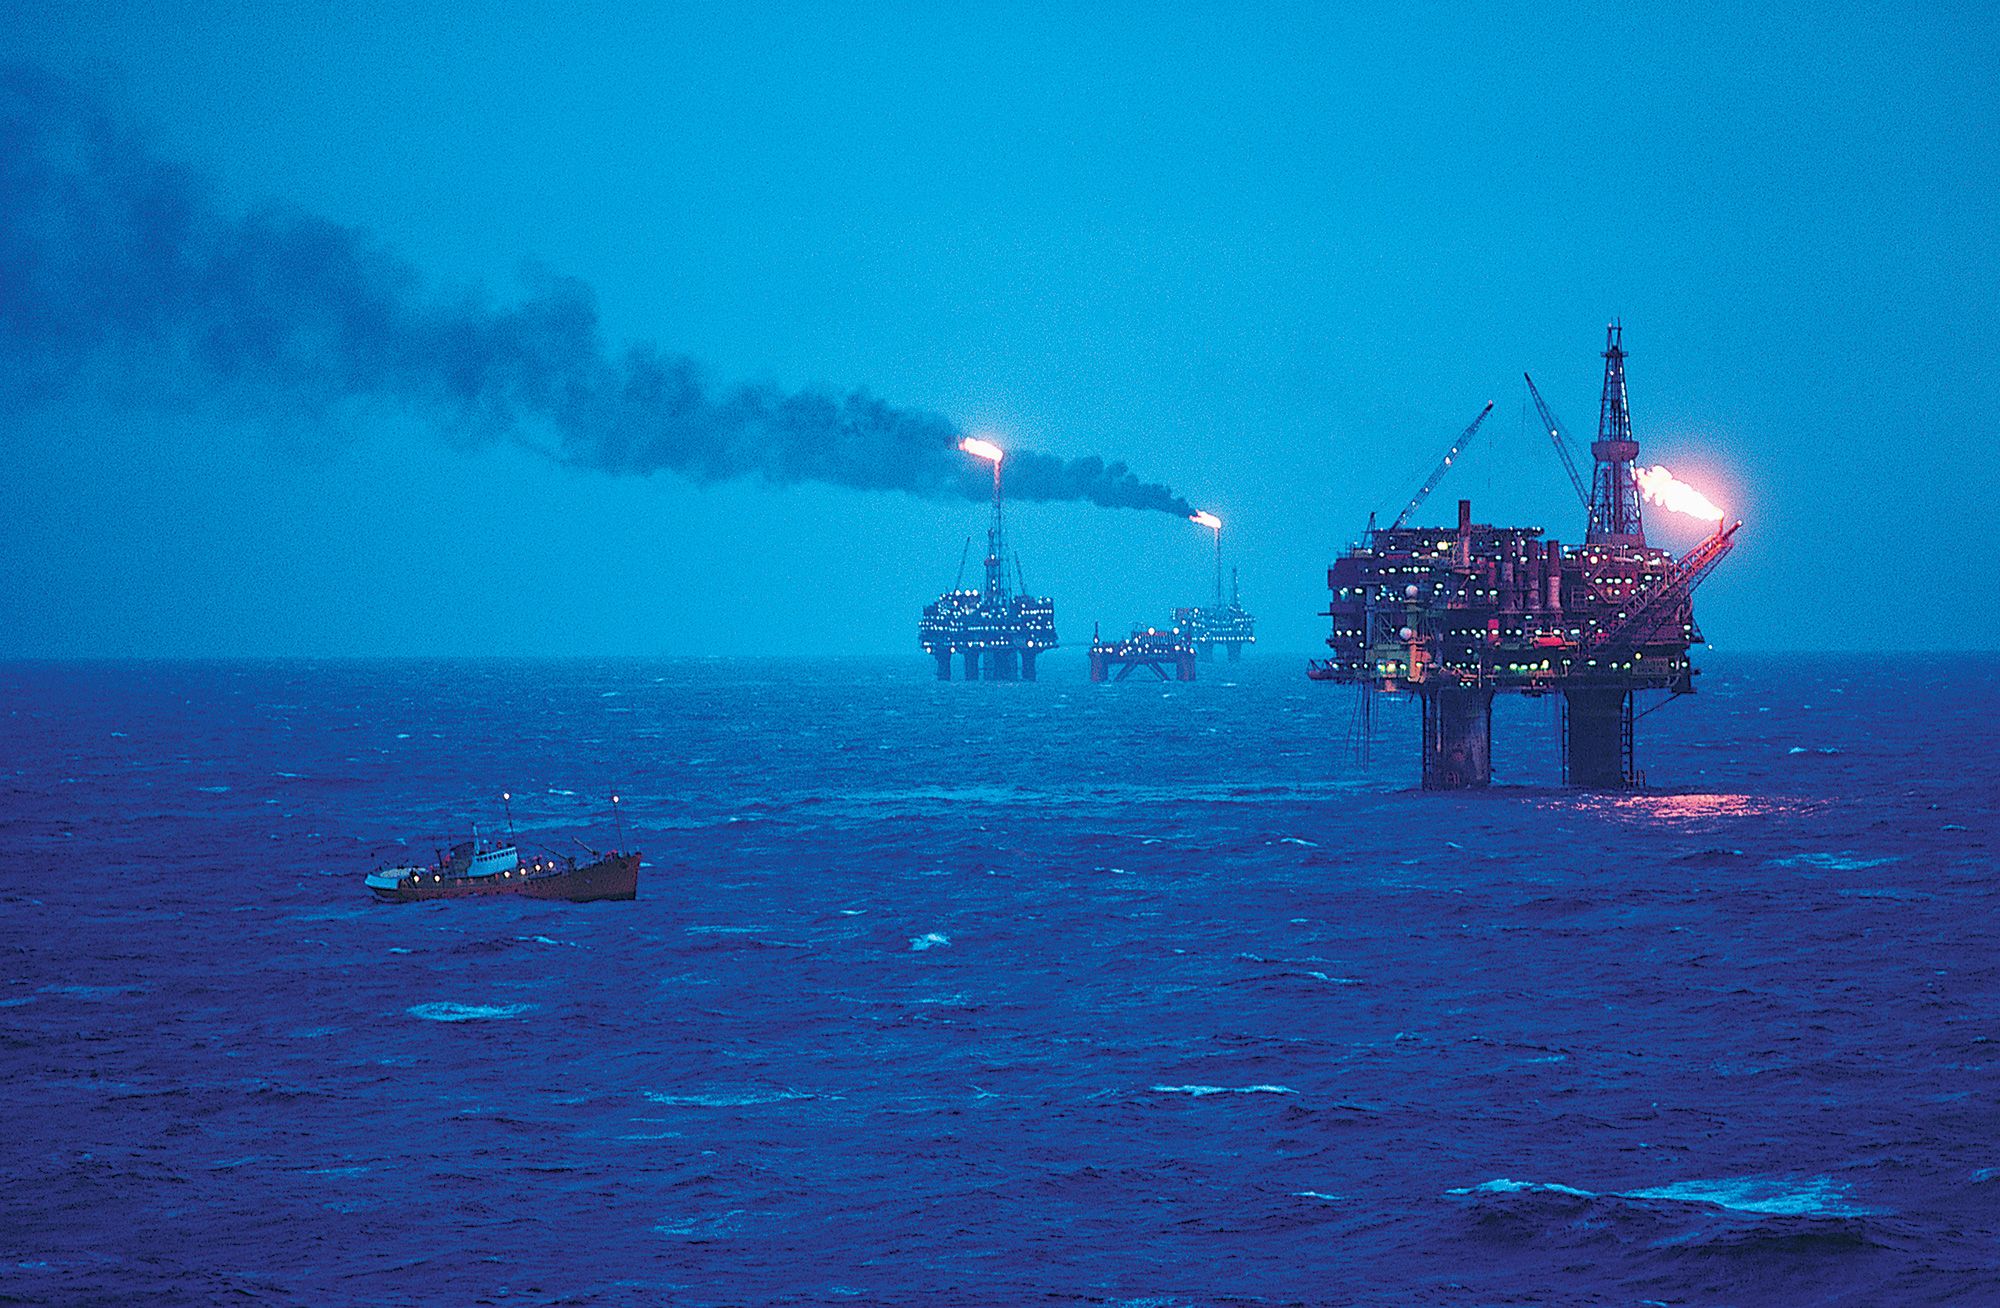 Oil refineries in middle of the blue sea